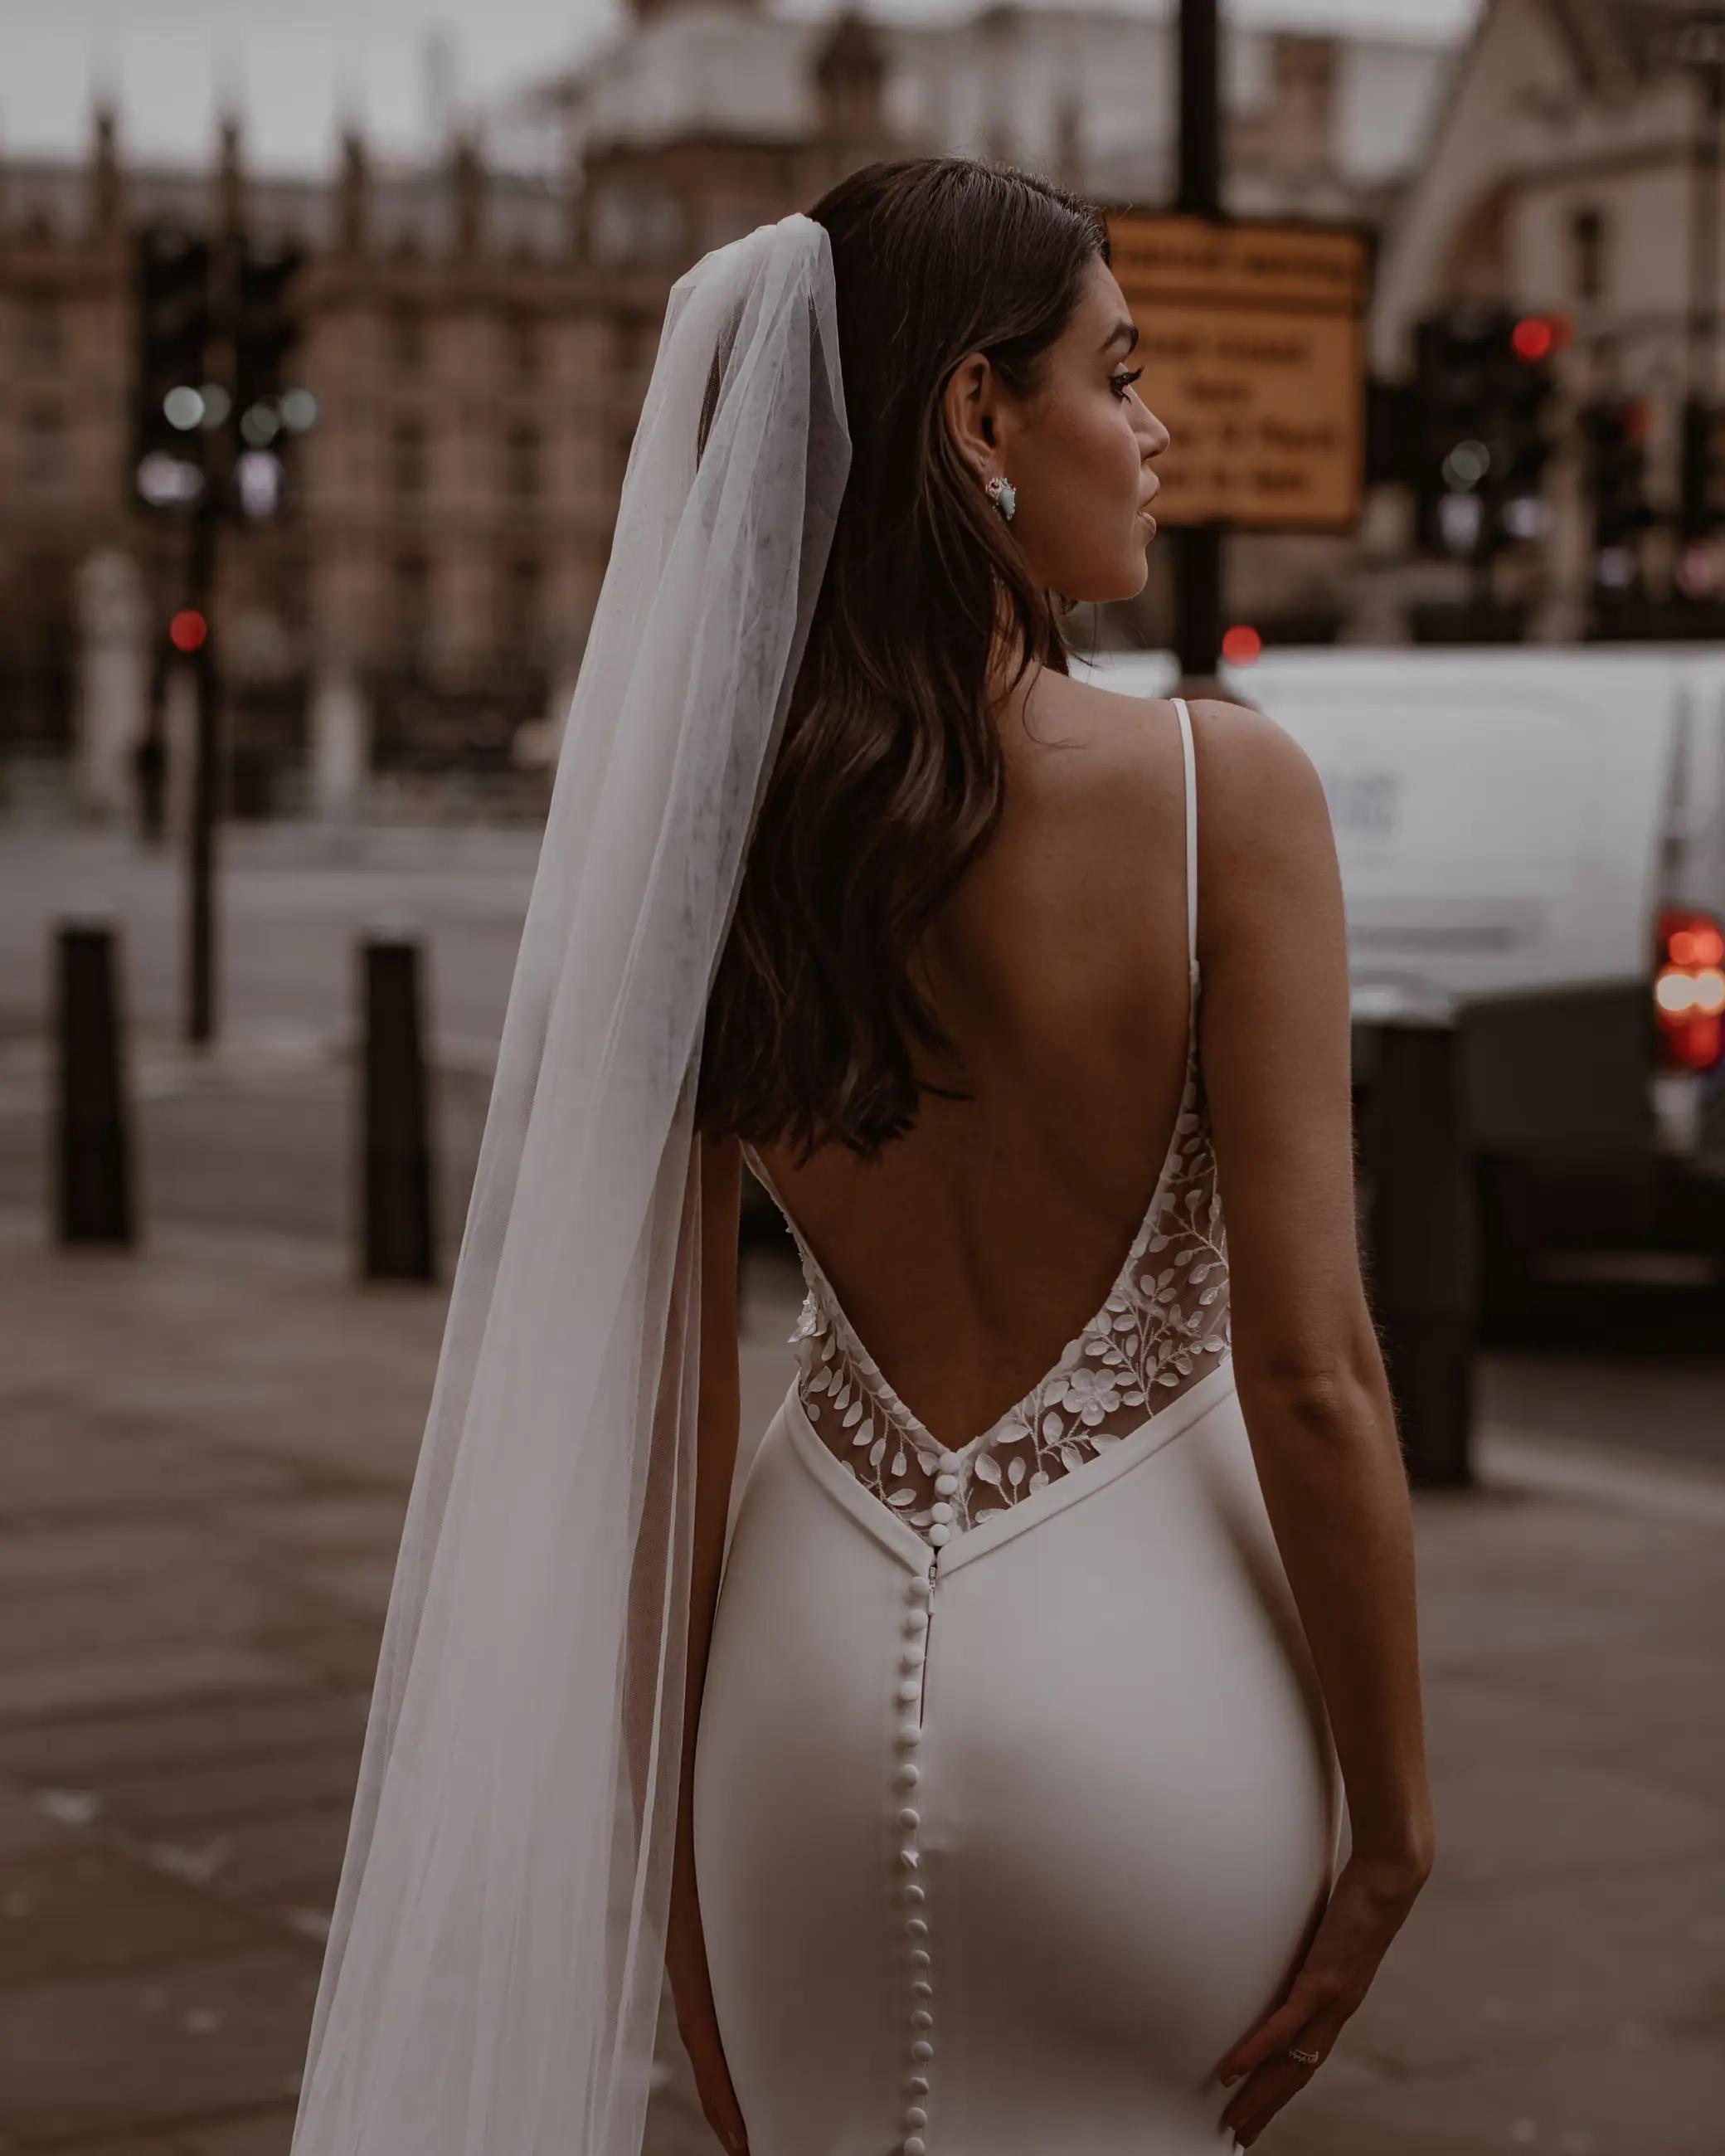 Model wearing style 'Valley' wedding dress from Made With Love